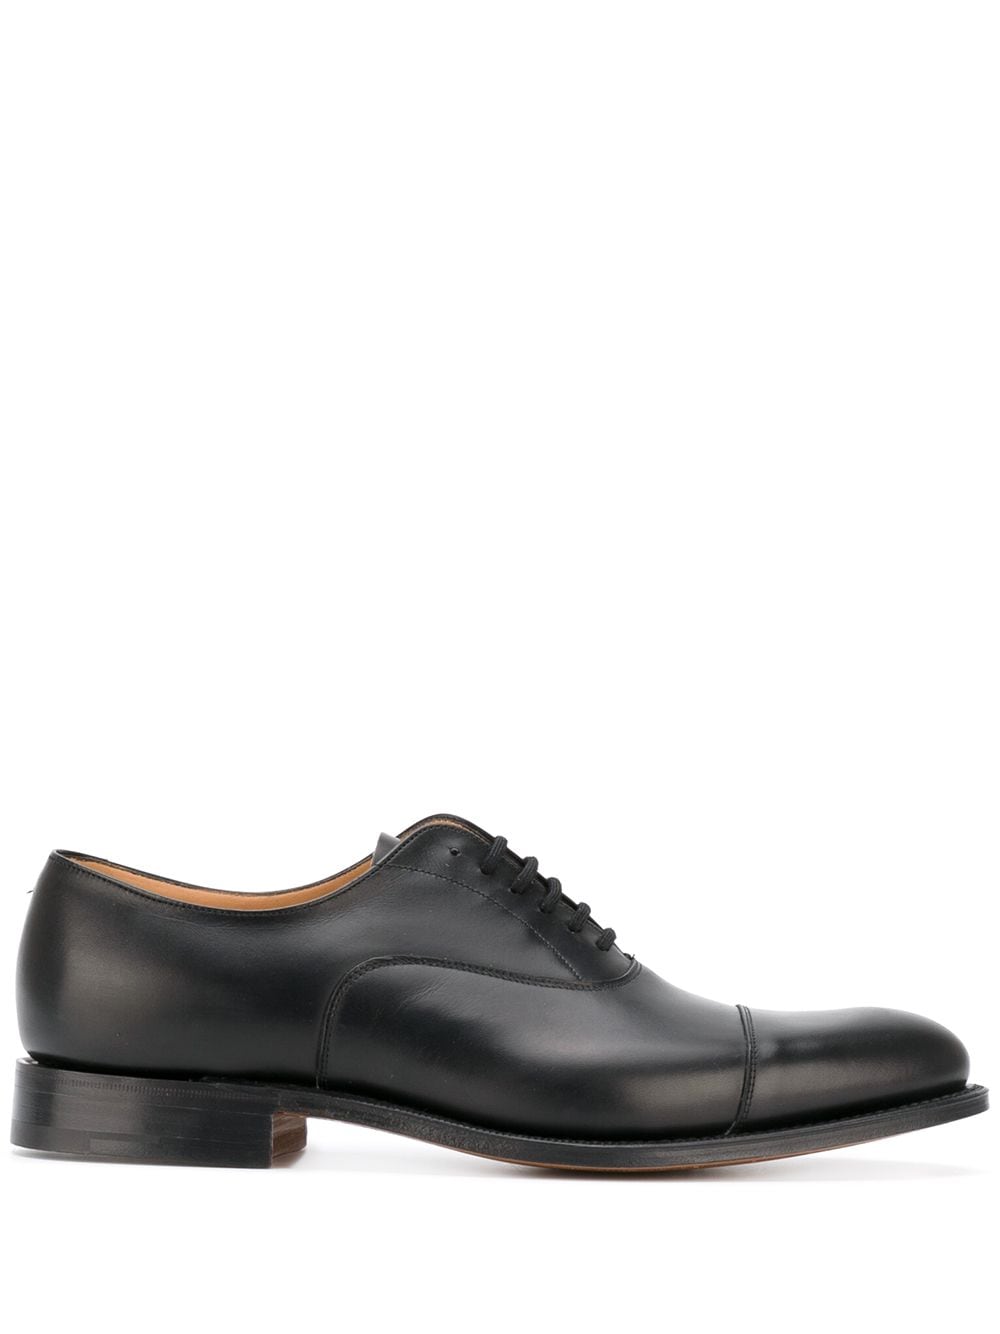 Shop Church's Dubai Oxford shoes with Express Delivery - FARFETCH